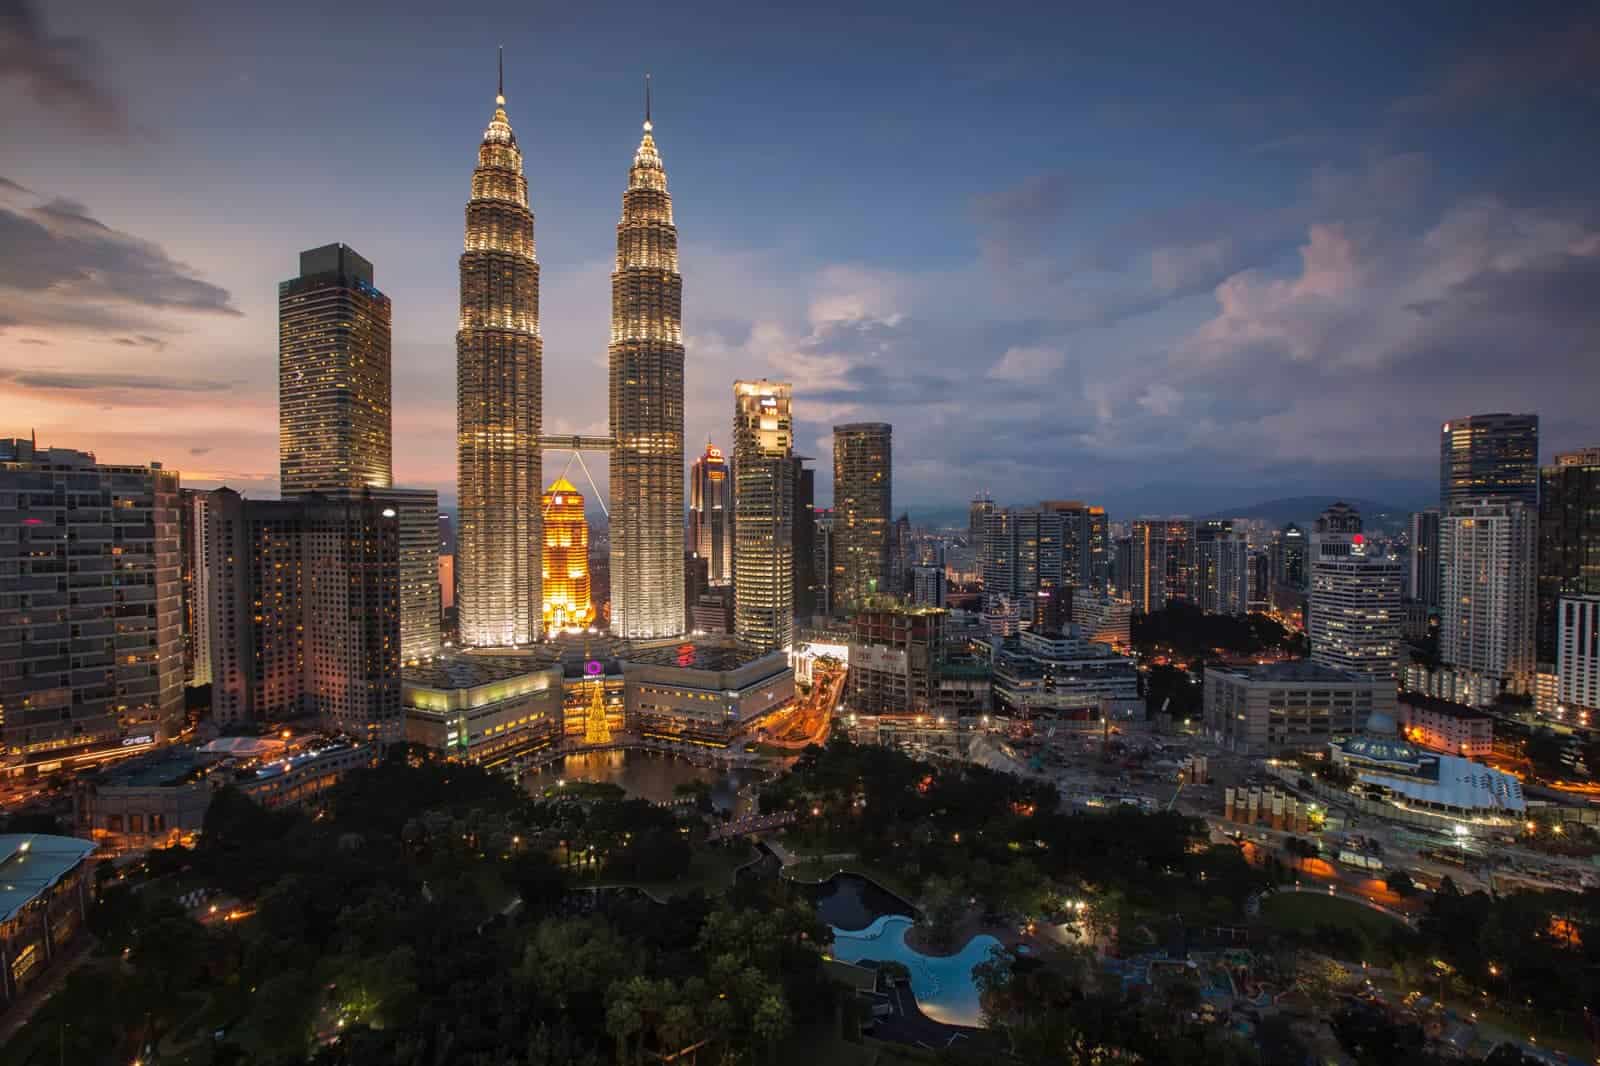 The Kuala Lumpur towers is a must on your Southeast Asia itinerary